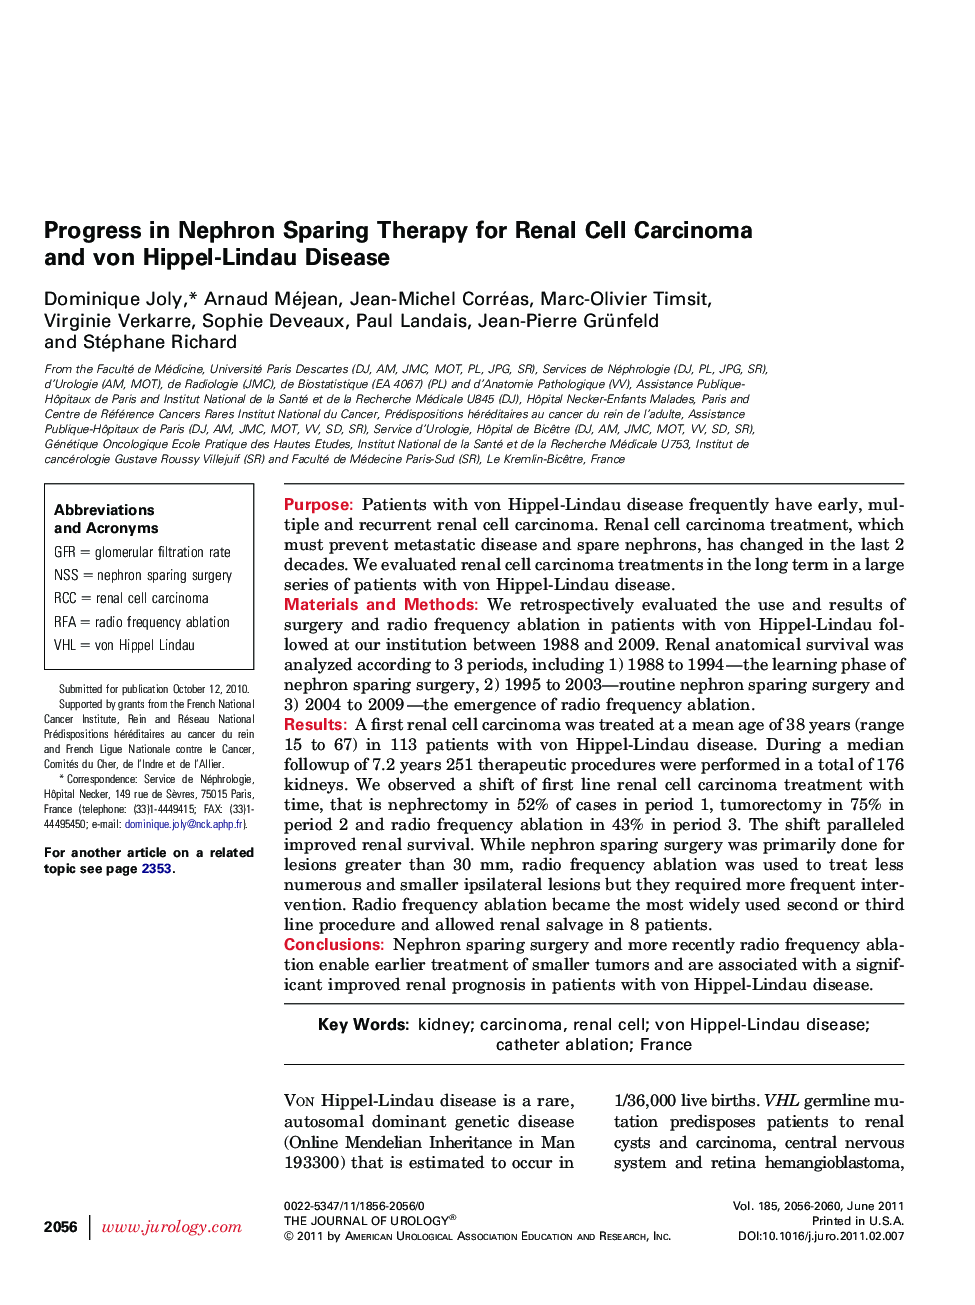 Progress in Nephron Sparing Therapy for Renal Cell Carcinoma and von Hippel-Lindau Disease 